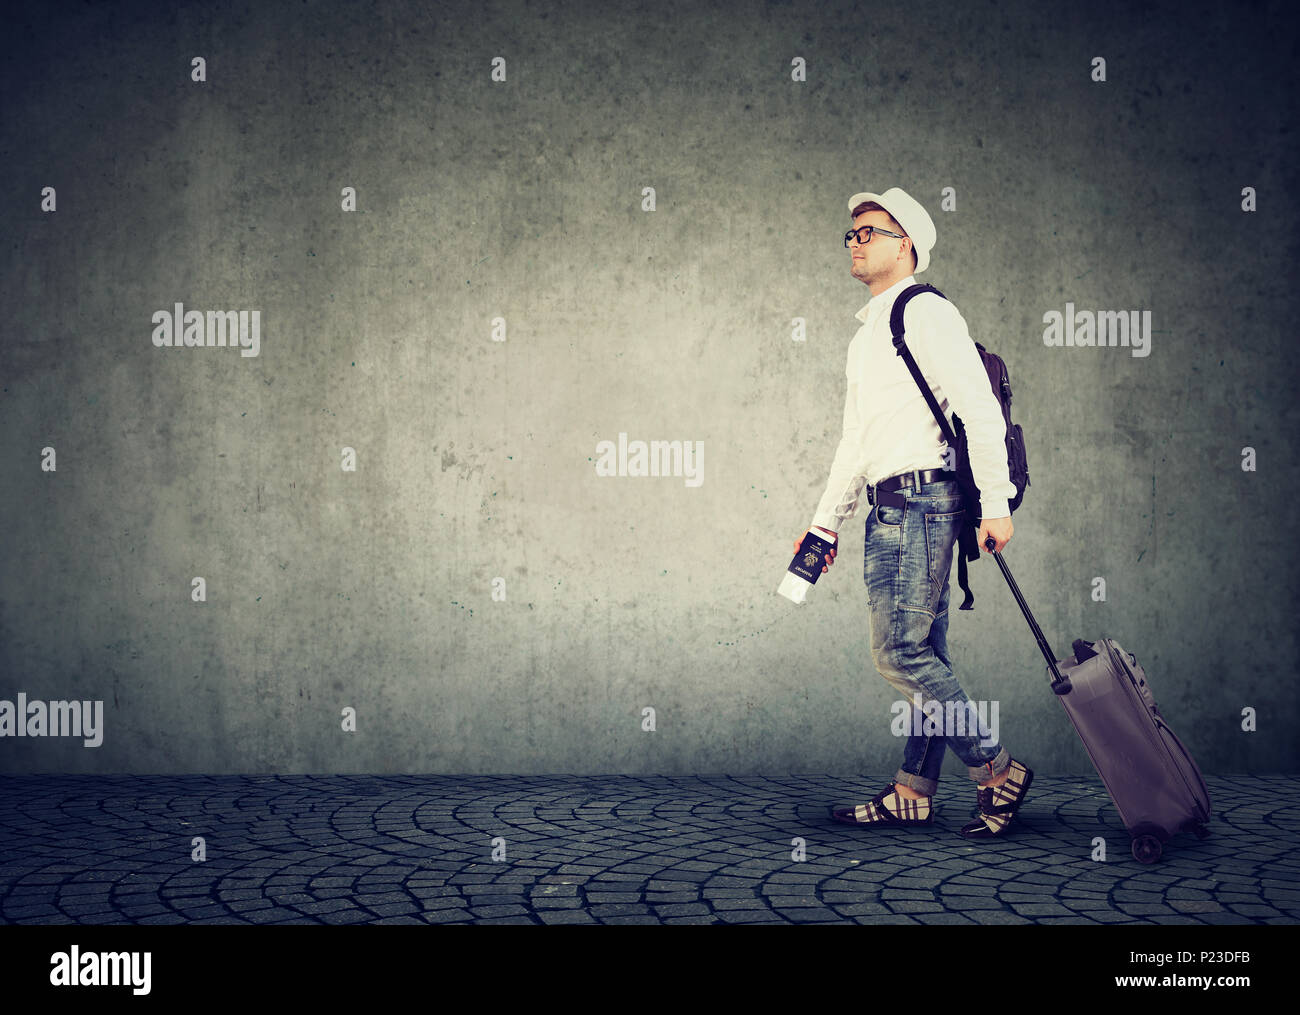 Man Backpack Airport Stock Photos & Man Backpack Airport Stock Images - Alamy1300 x 1015